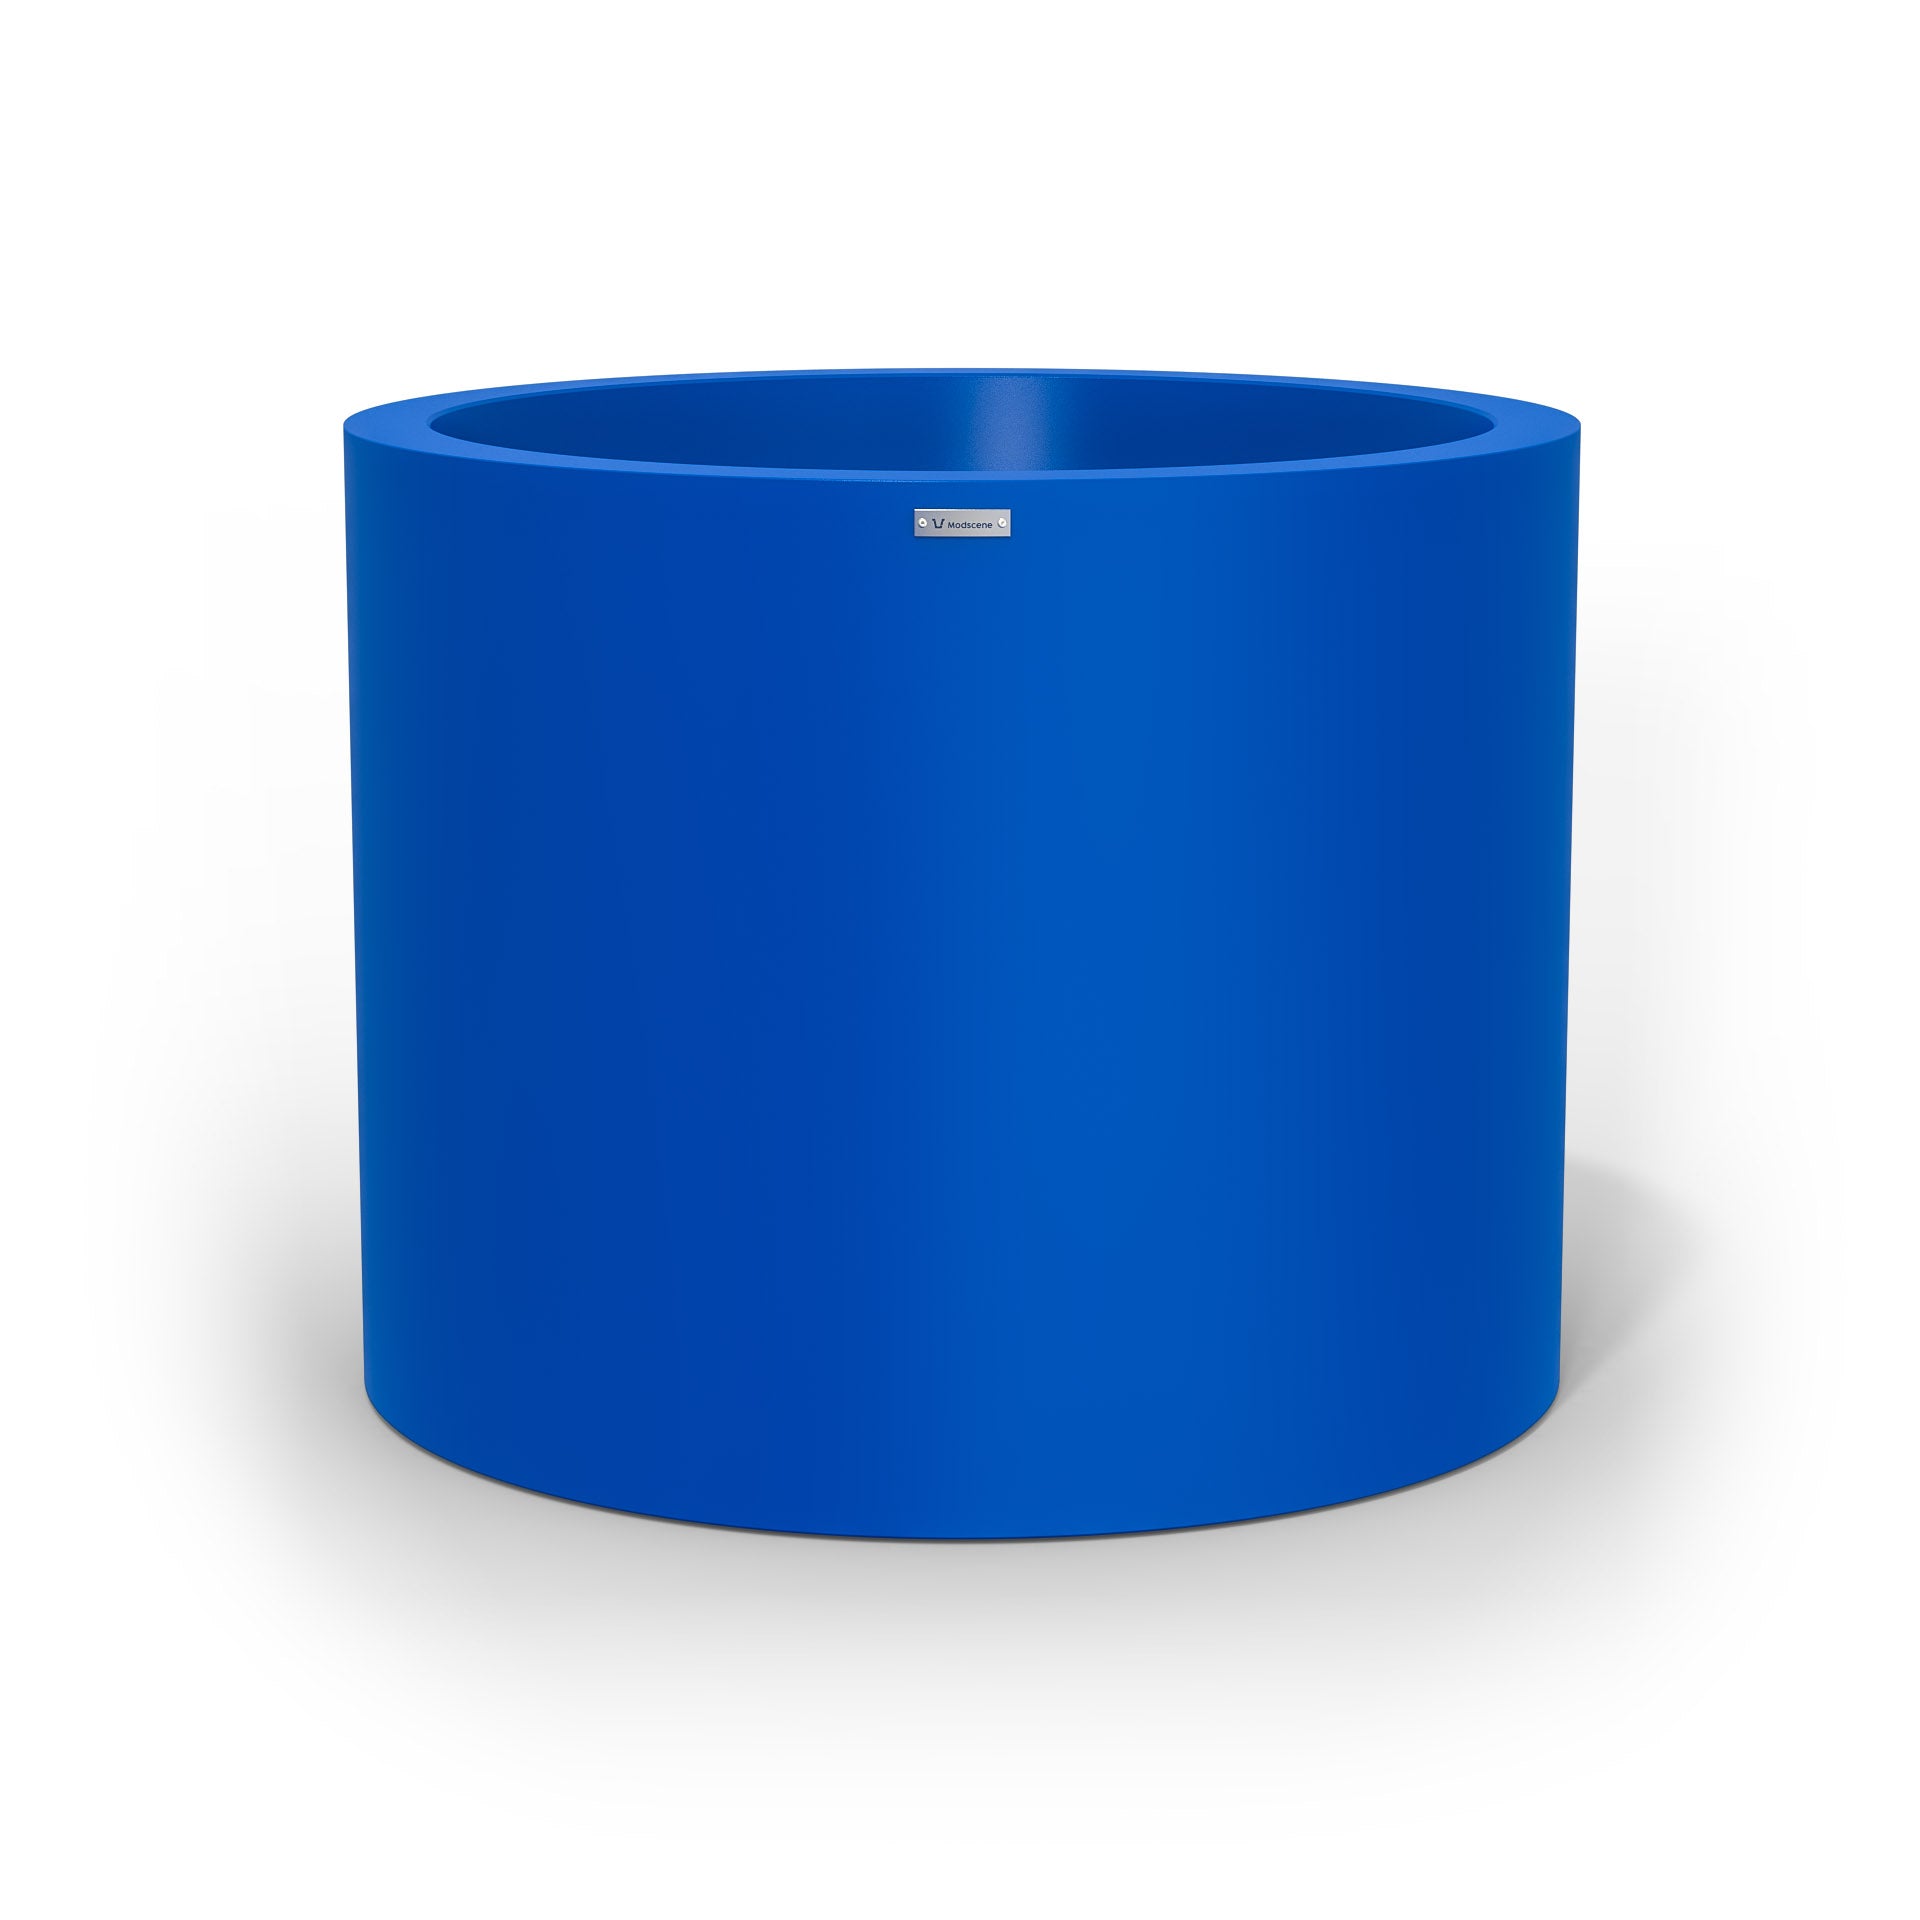 An extra large cylinder pot planter in a deep blue colour. Made by Modscene NZ.